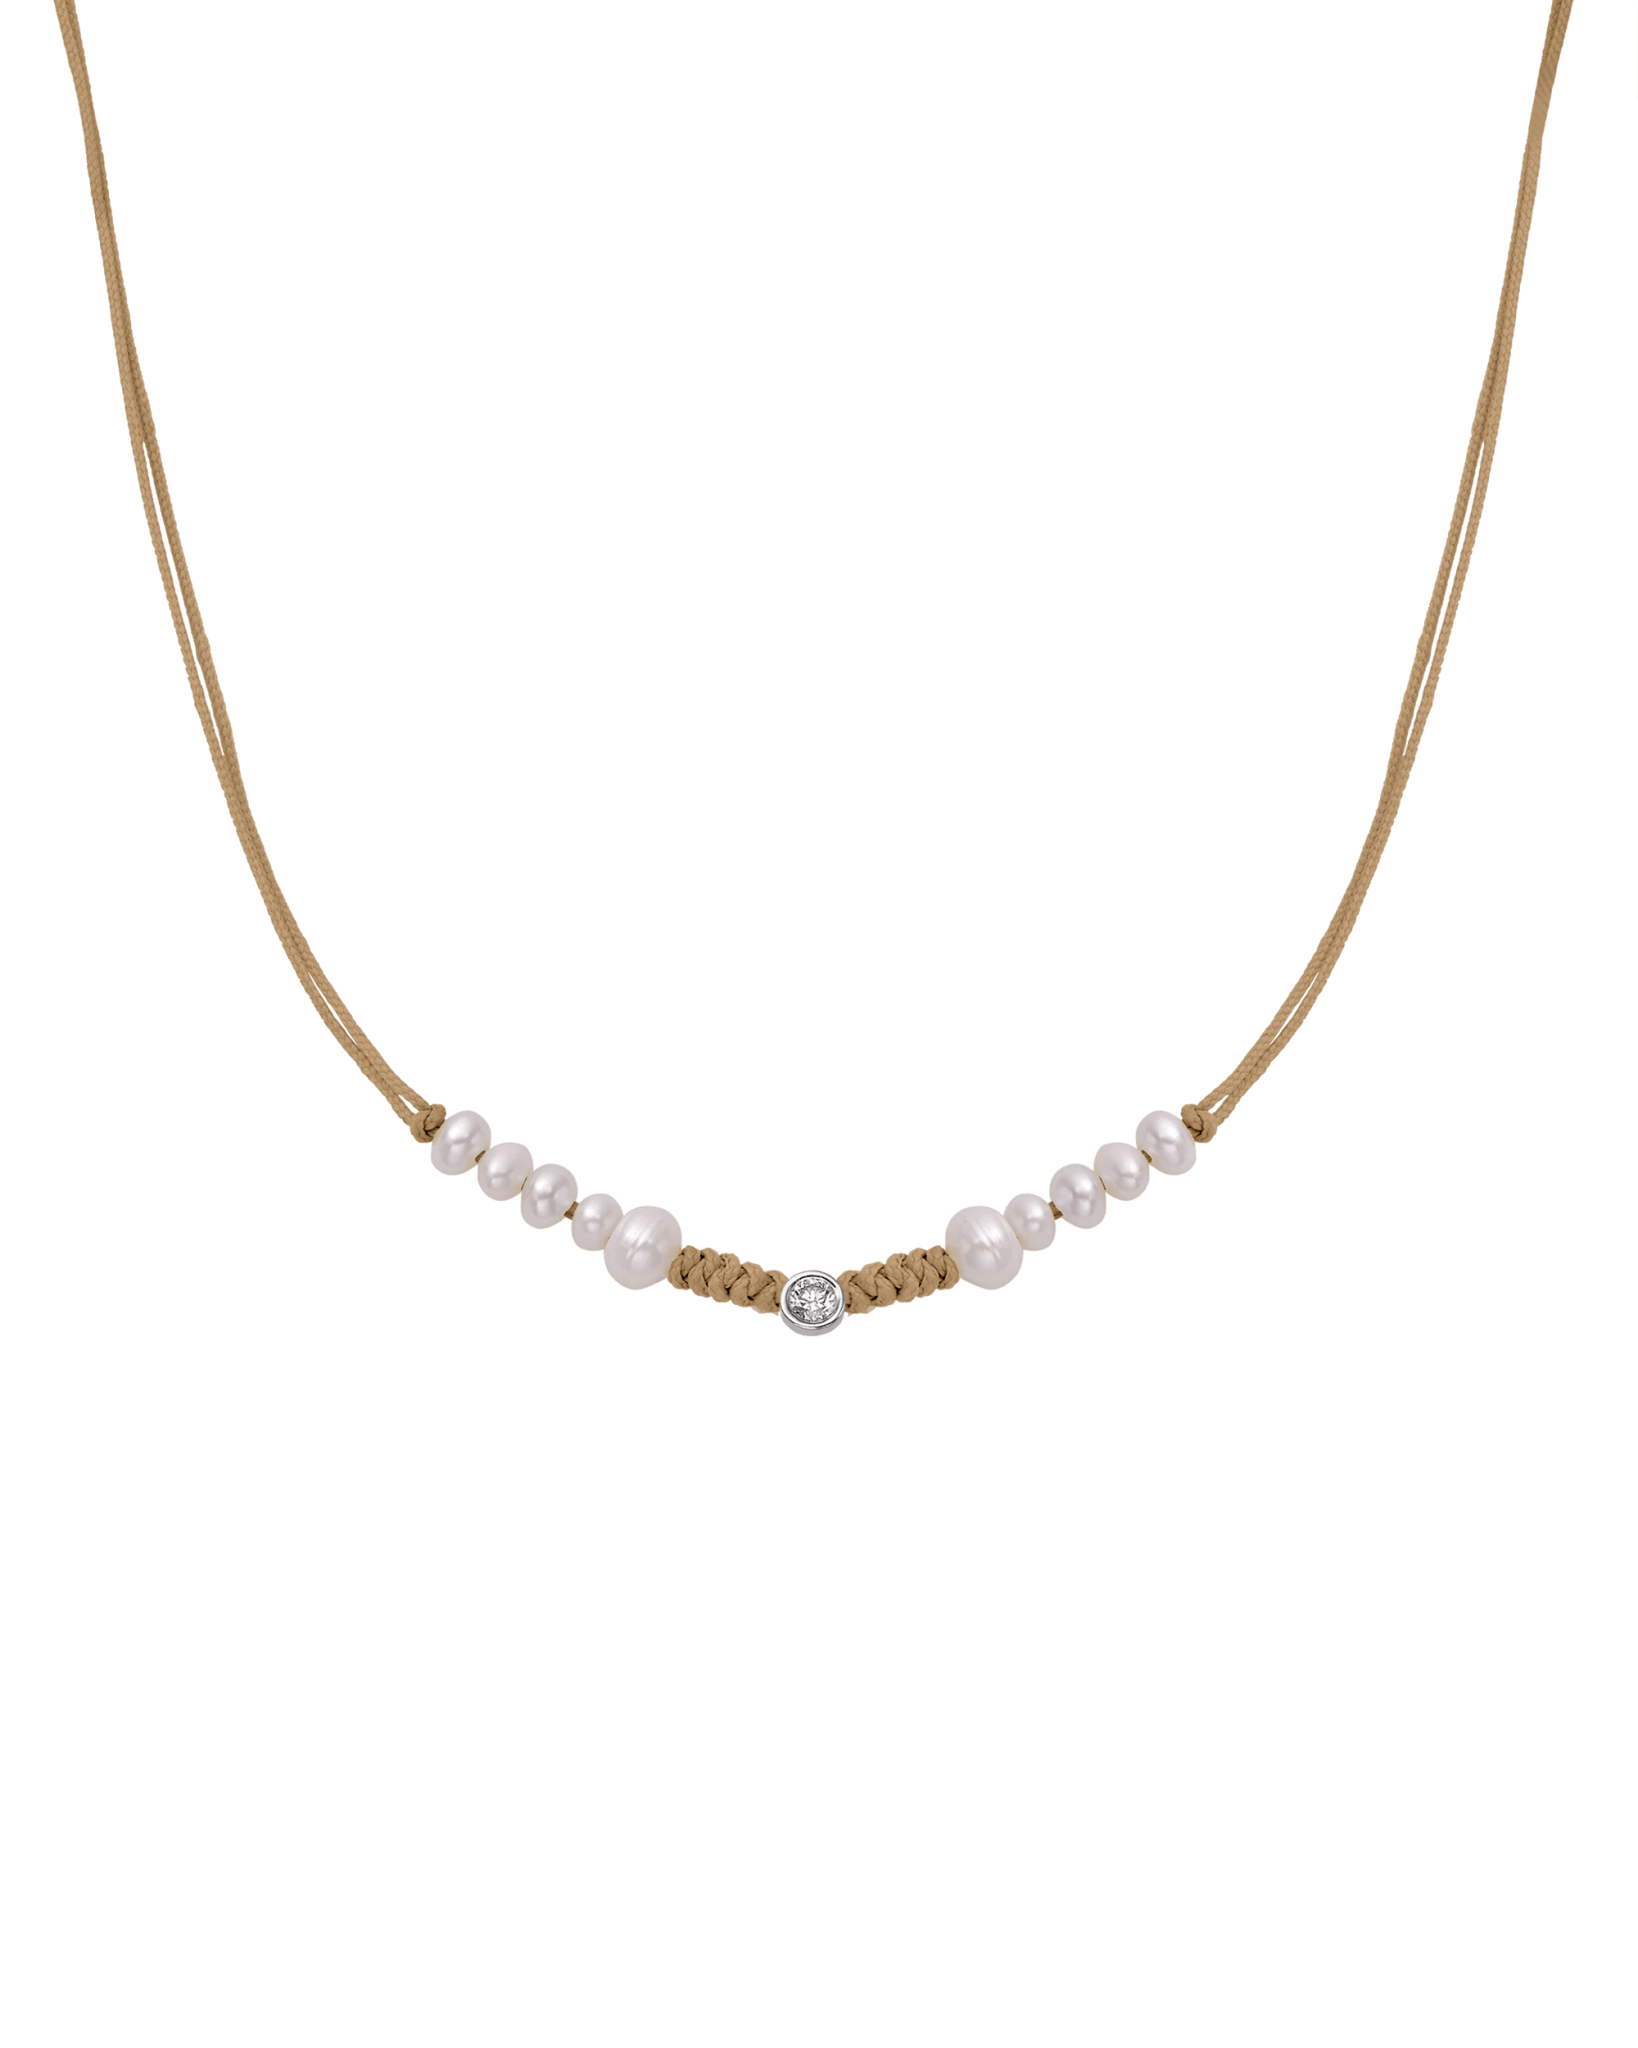 Ten Natural Pearl String of Love Necklace - 14K White Gold Necklaces 14K Solid Gold Camel Large: 0.1ct 